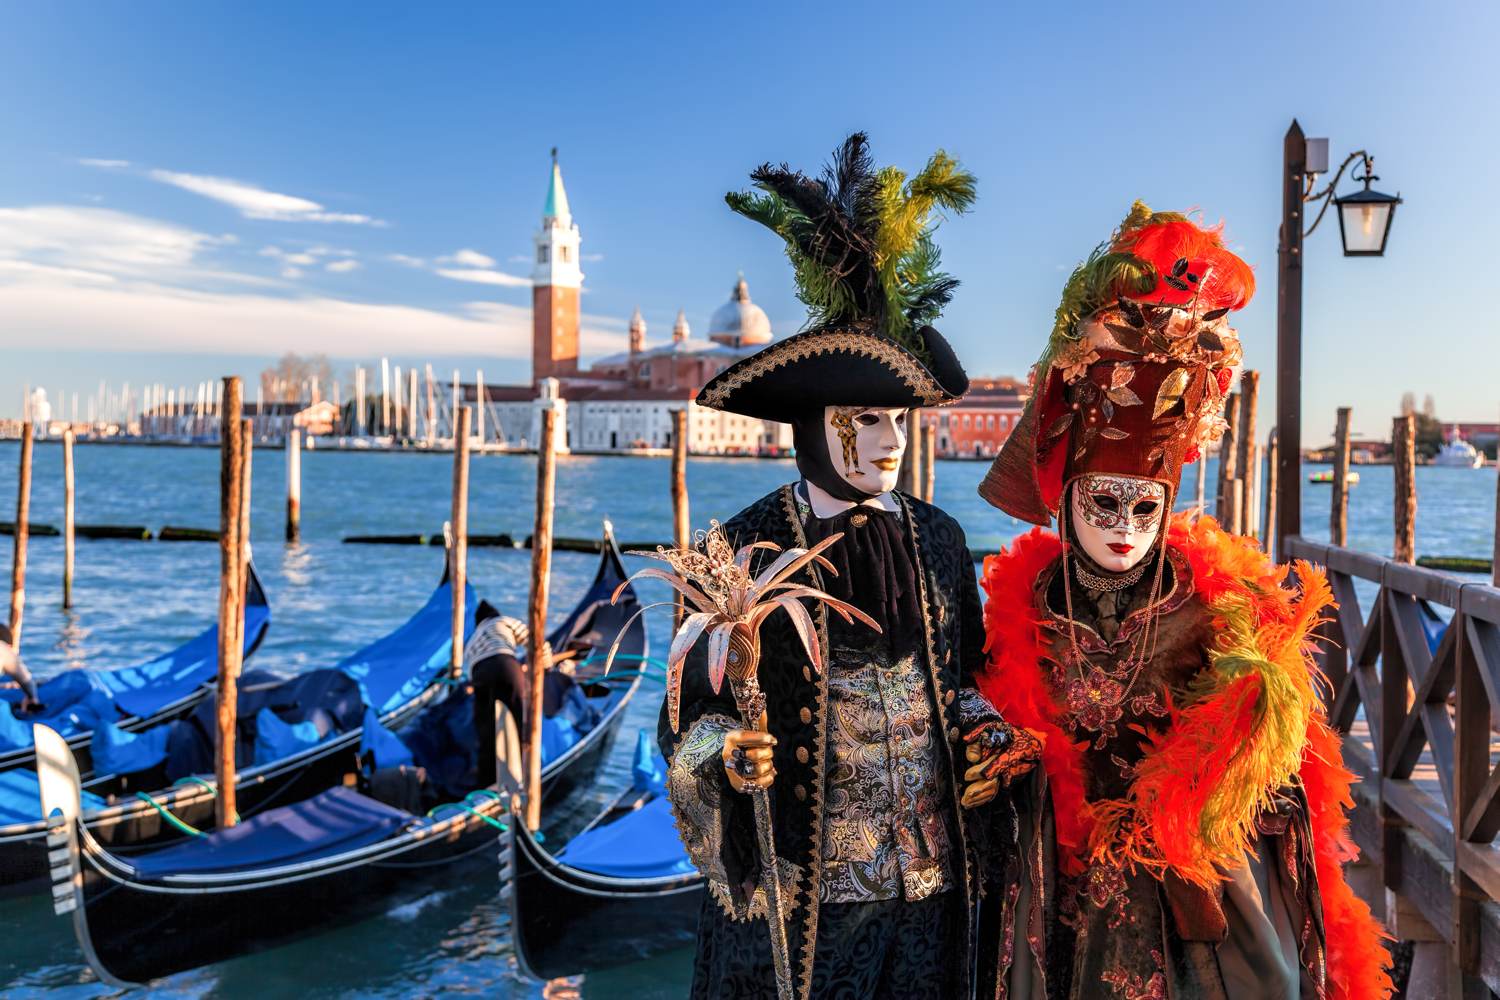 People in costume with masks at Venice Carnival